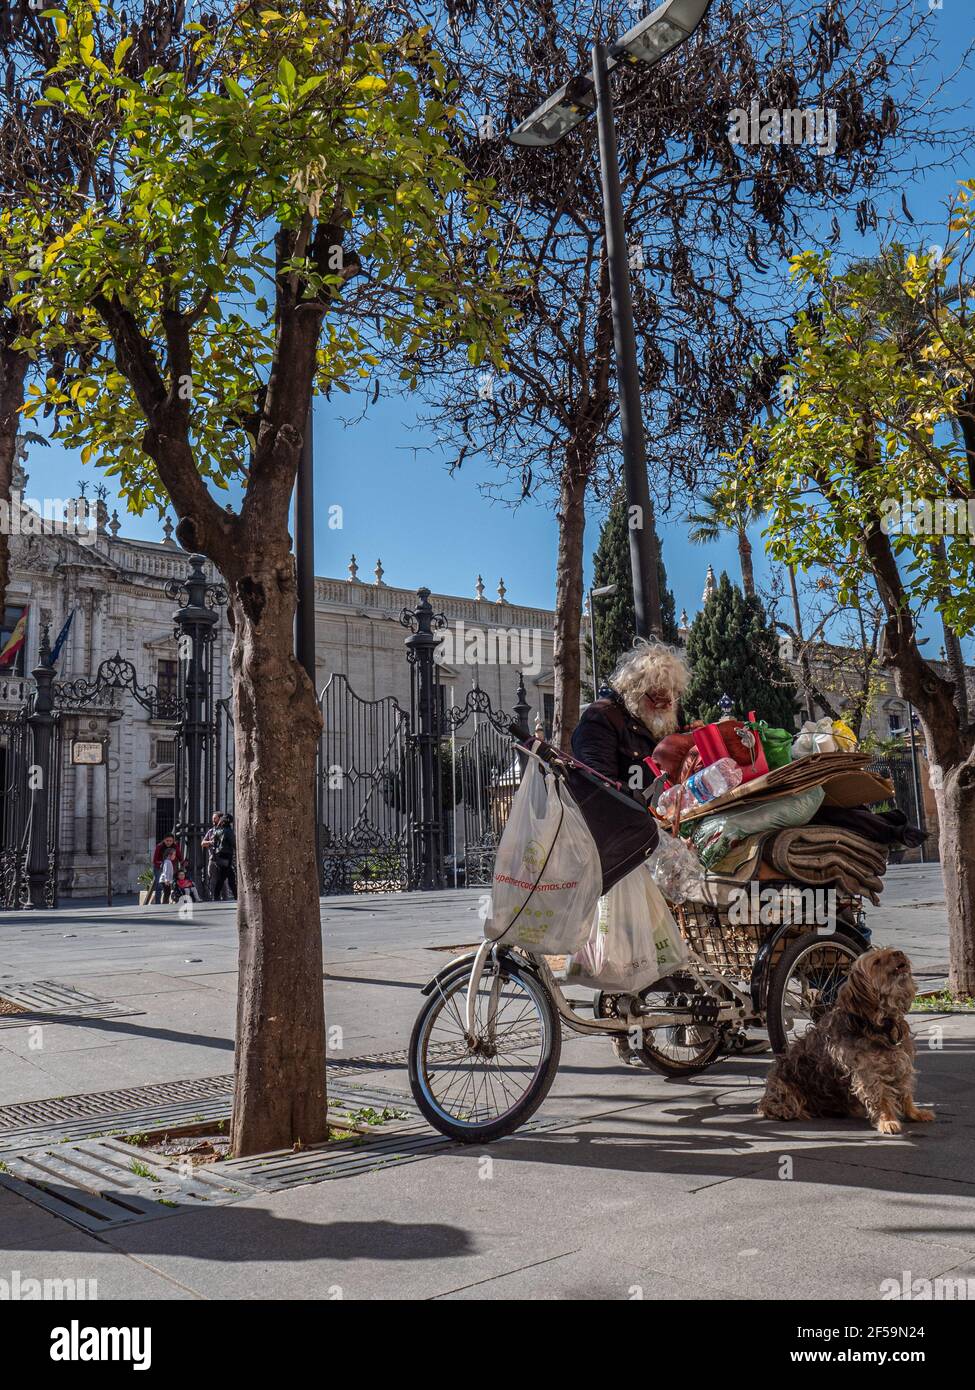 A homeless person and his canine companion with bike and belongings in Seville Spain Stock Photo